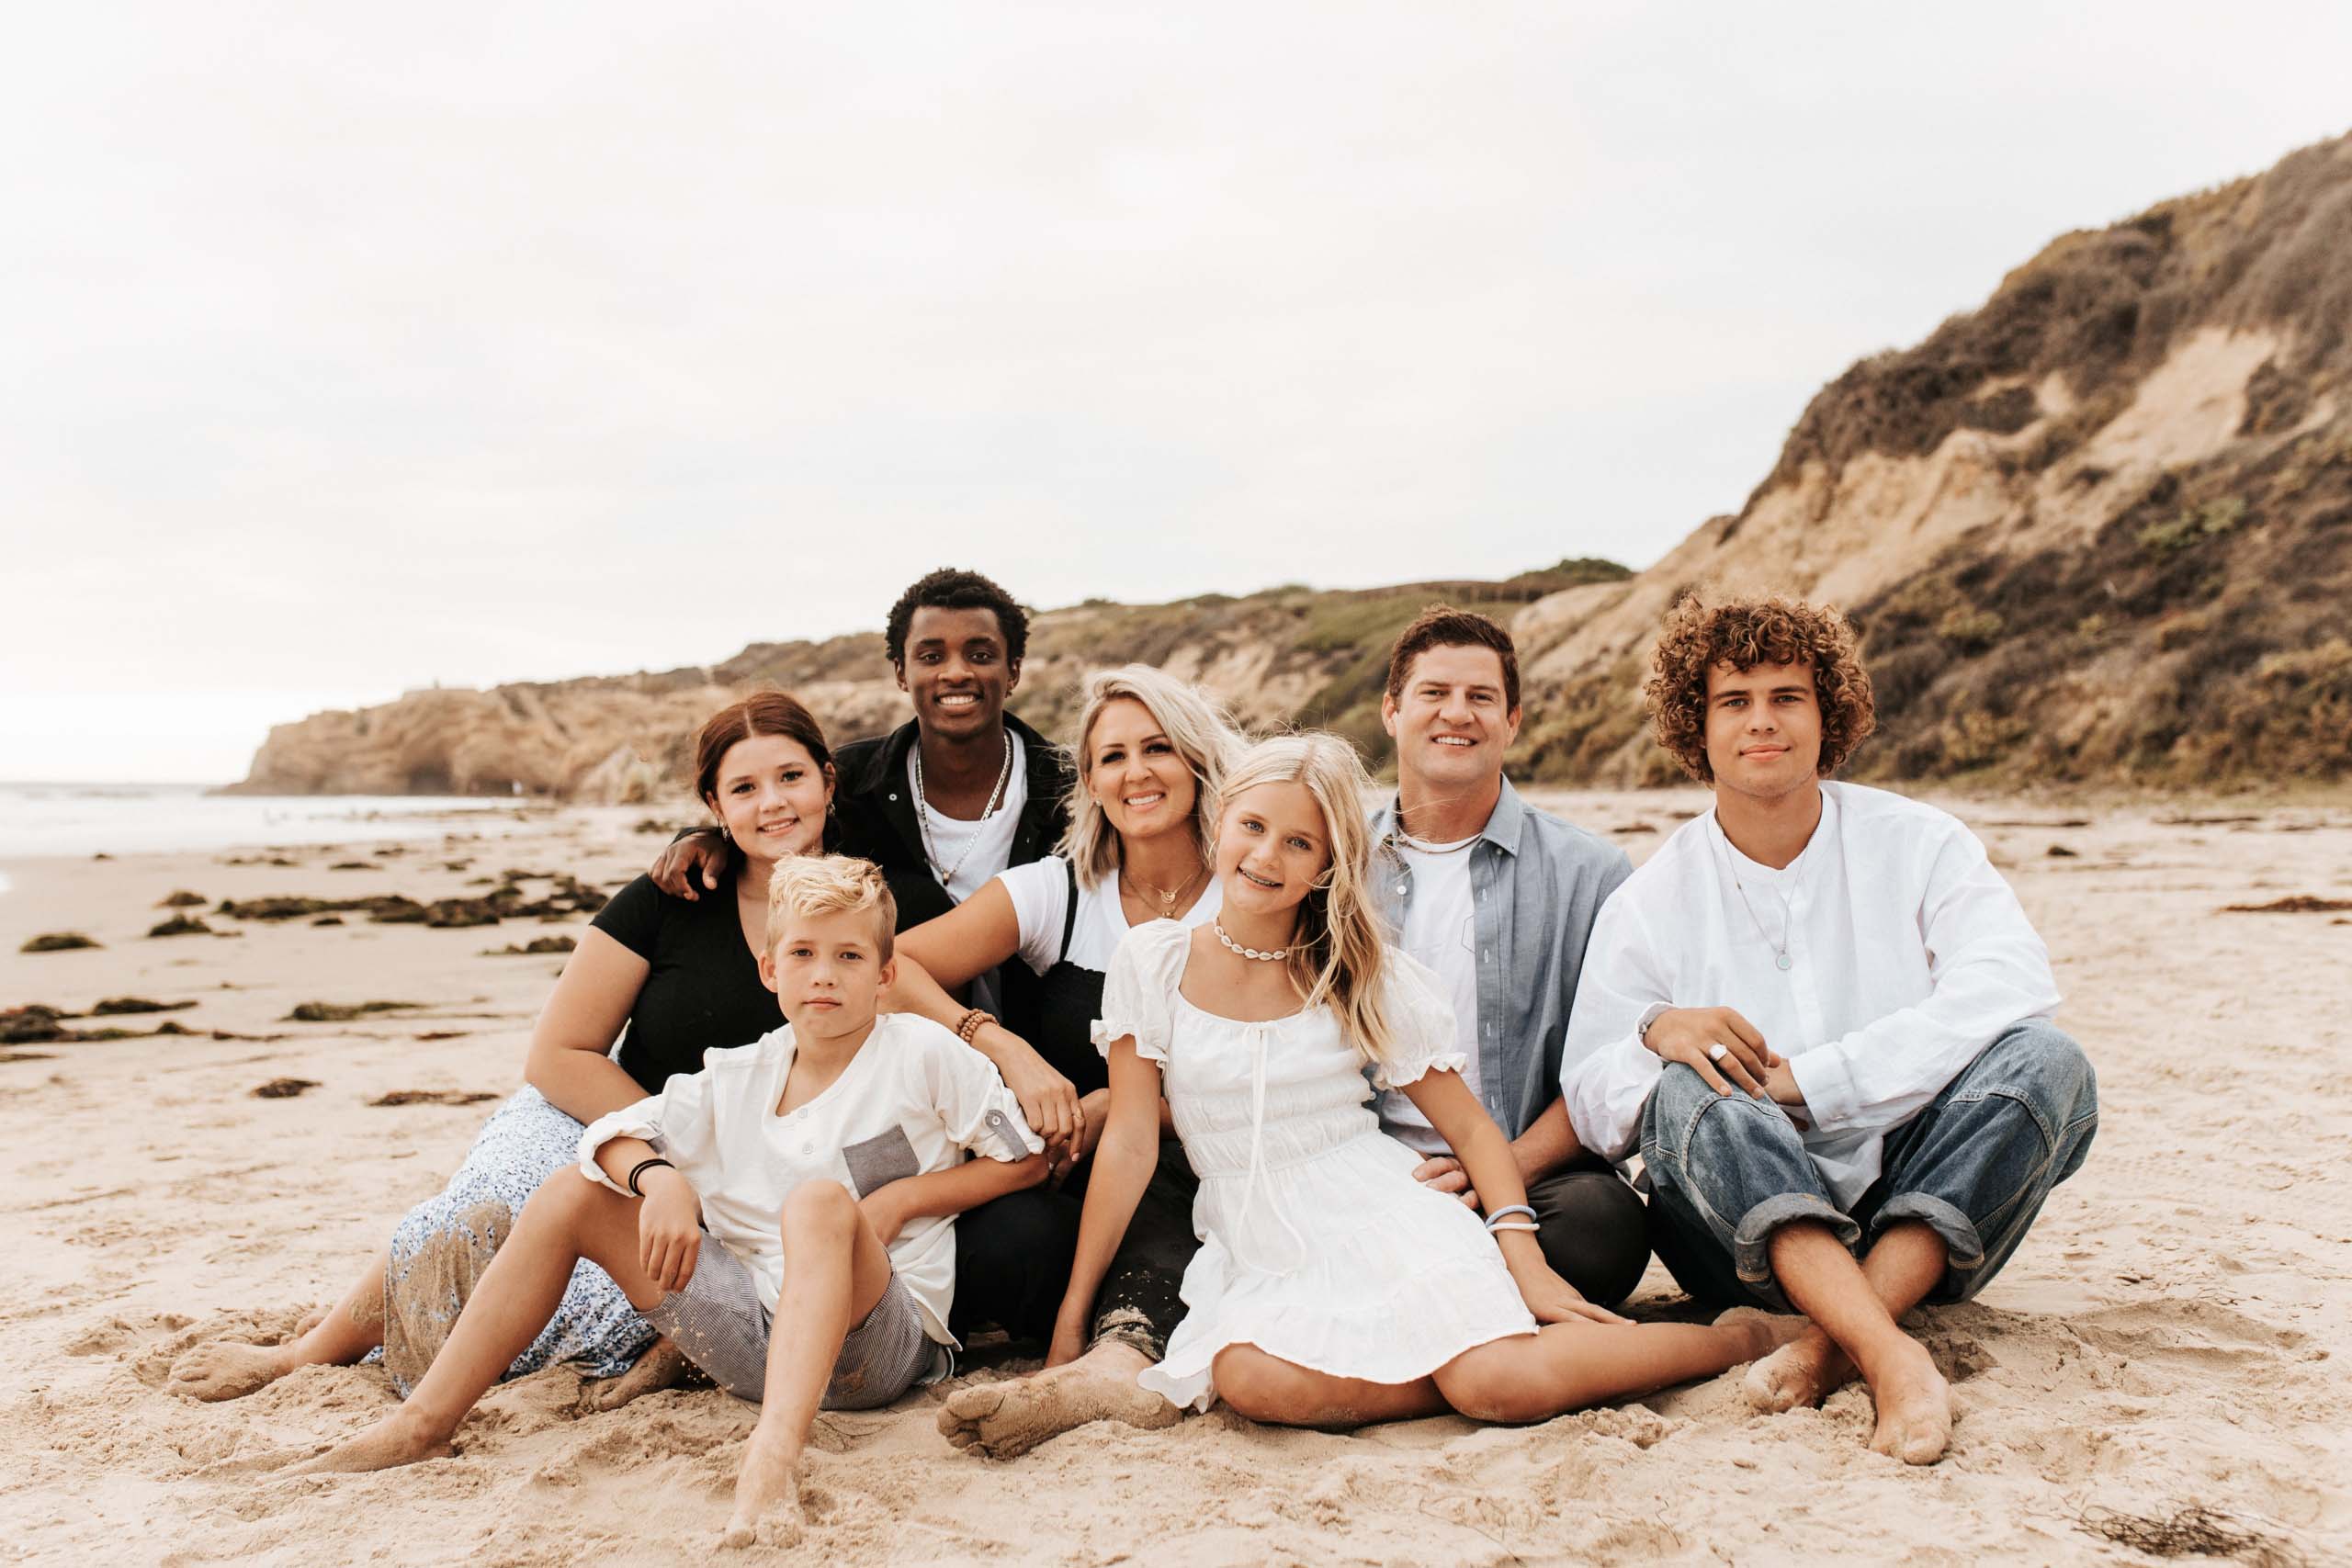 Burke family photo on a beach with ocean and cliffs in background.